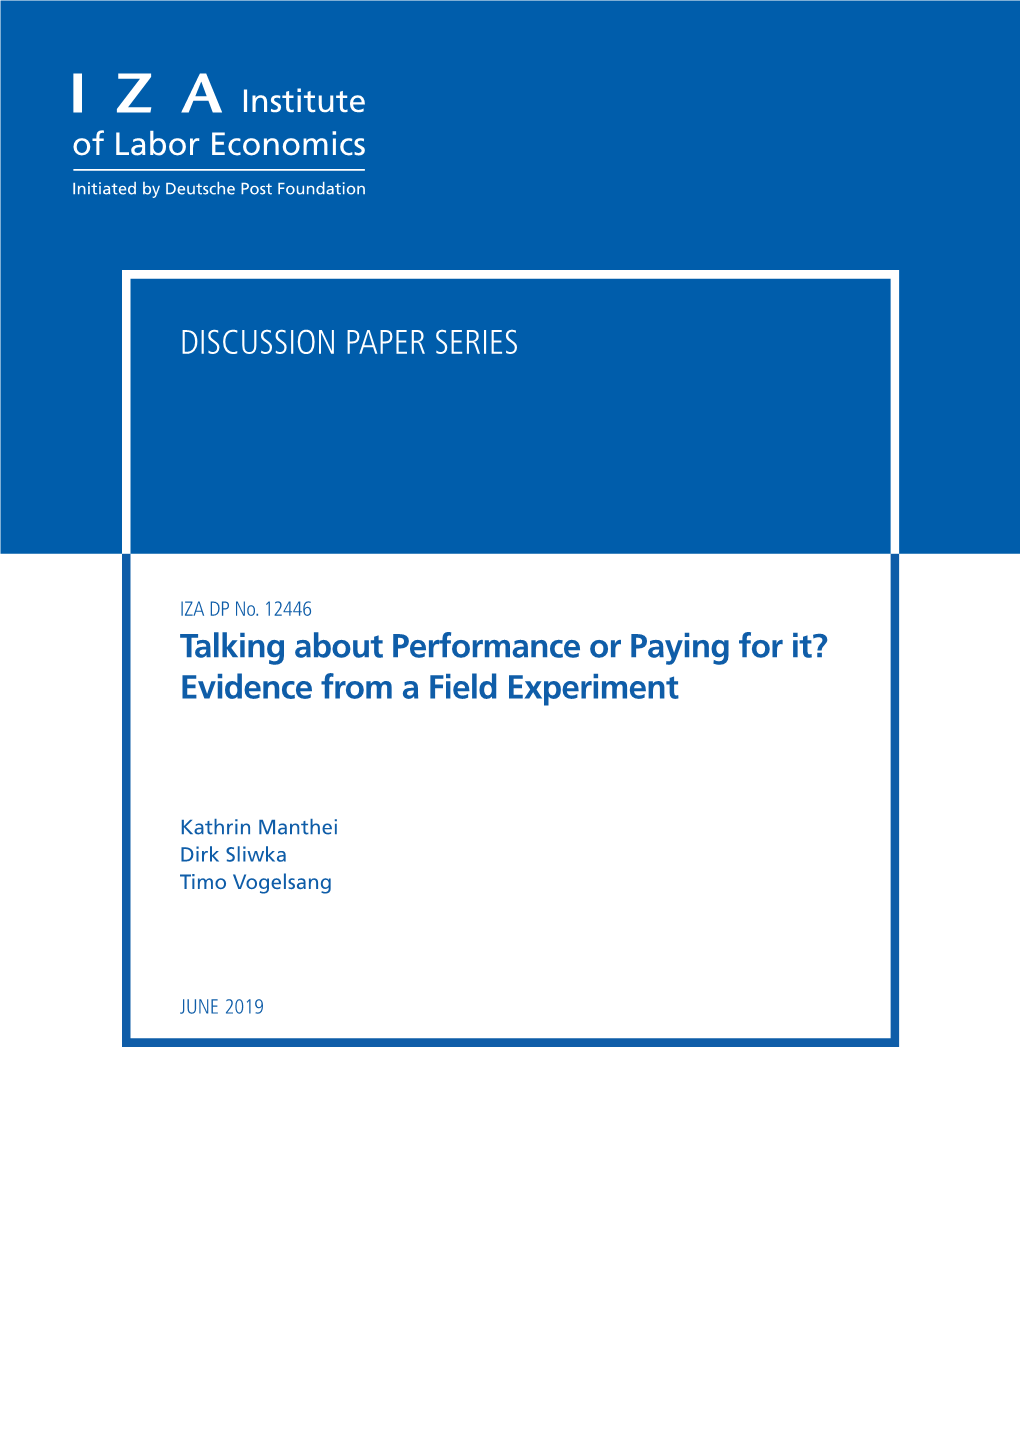 Talking About Performance Or Paying for It? Evidence from a Field Experiment